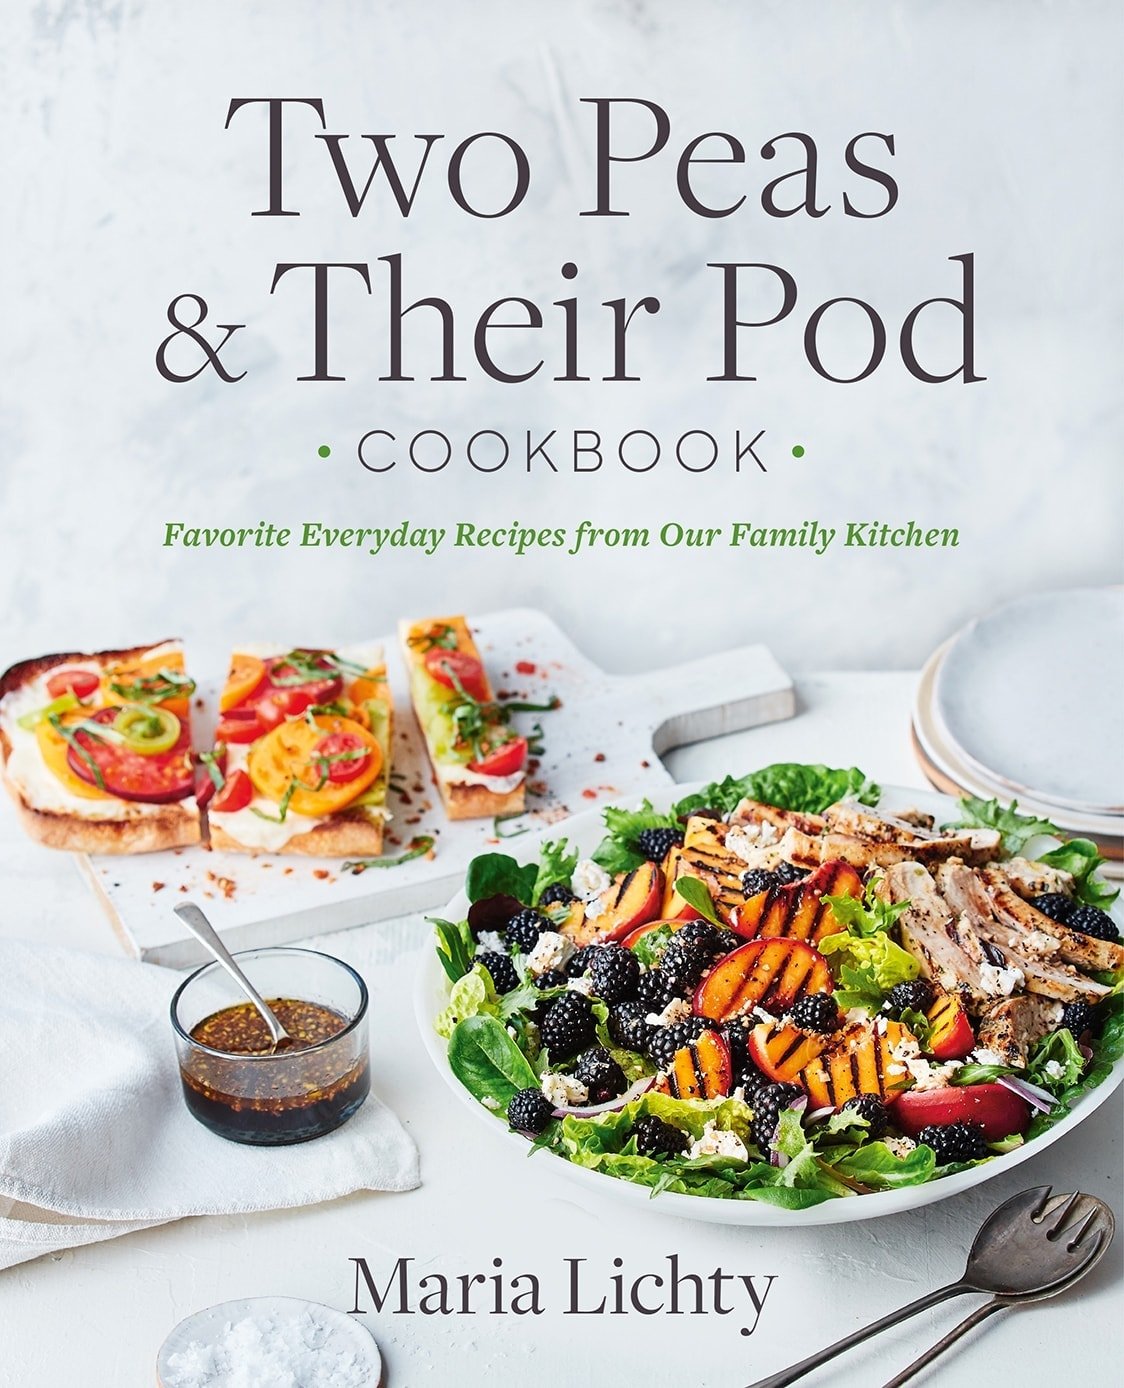 My Favorite Recipes Cookbook (Everyday Cookbook Collection)